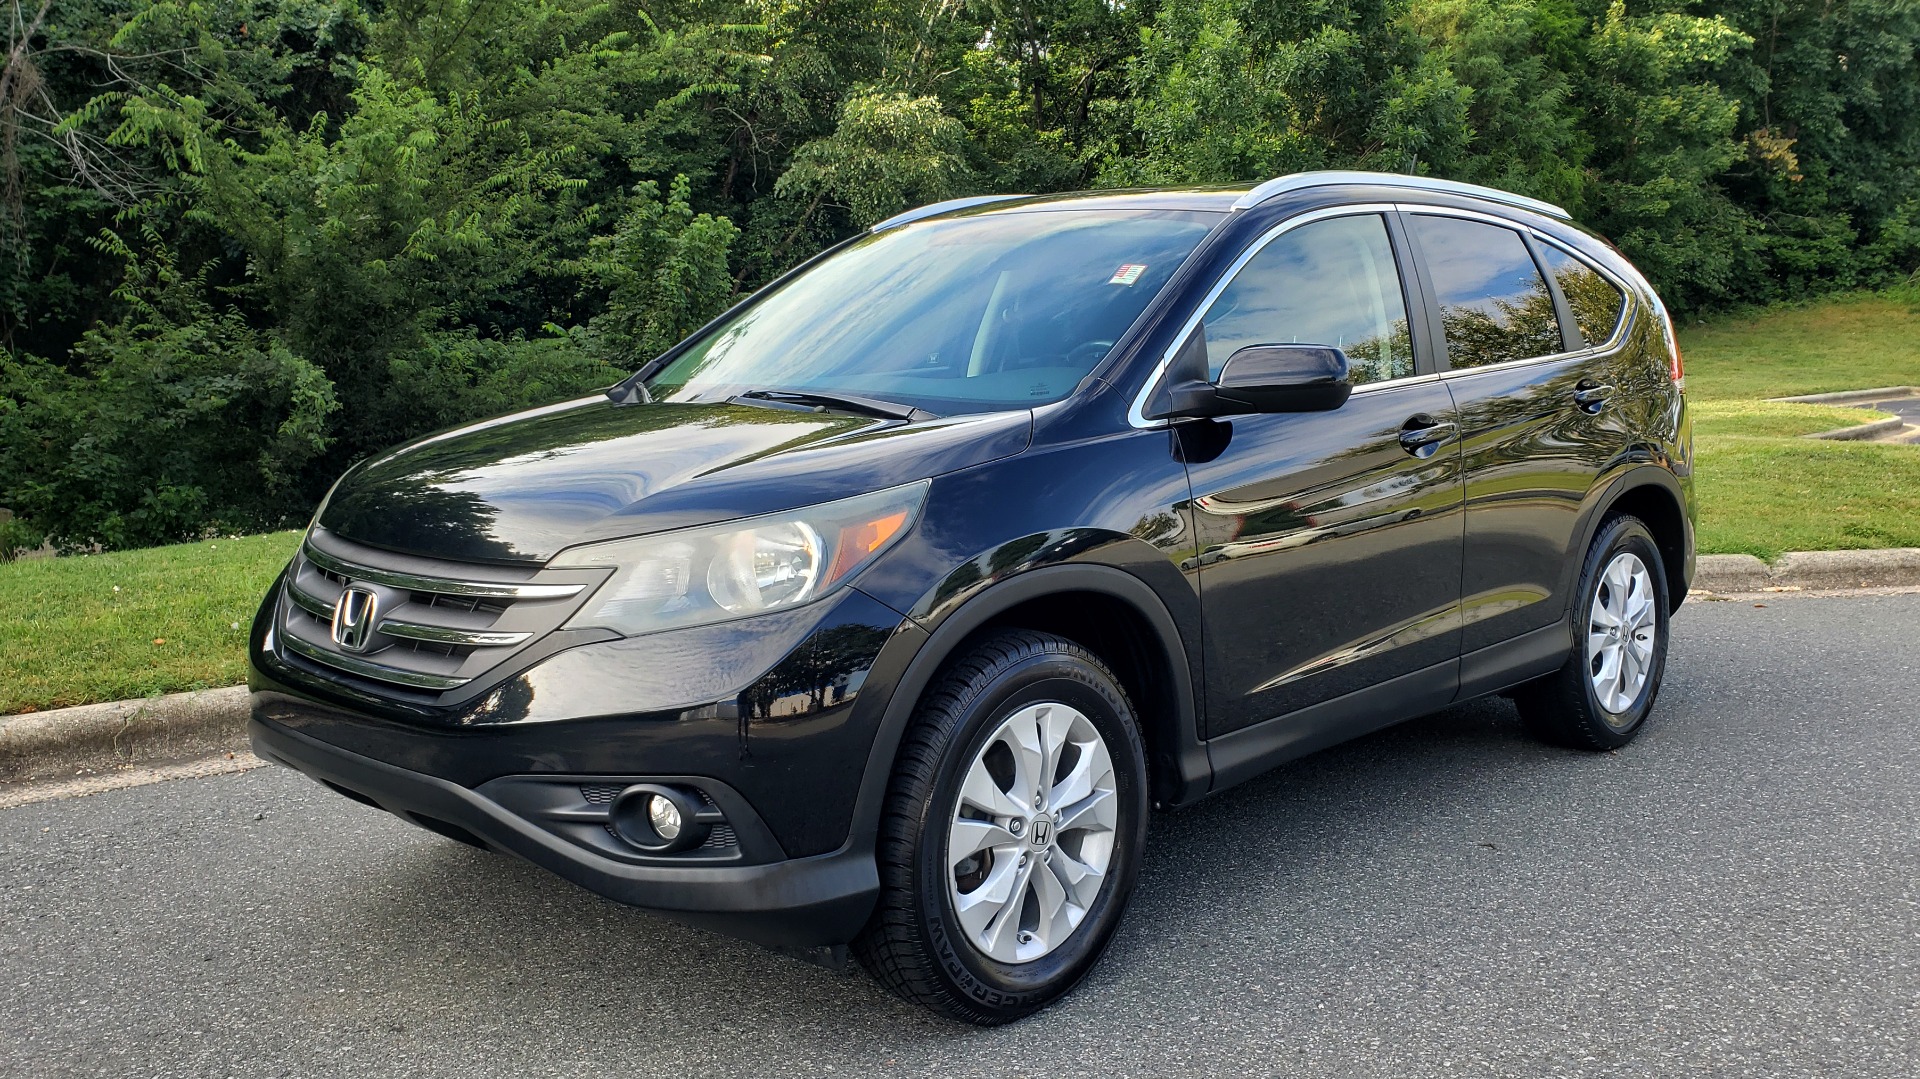 Used 2012 Honda CR-V EX-L / AWD / 5DR / SUNROOF / HEATED SEATS / REARVIEW for sale Sold at Formula Imports in Charlotte NC 28227 1